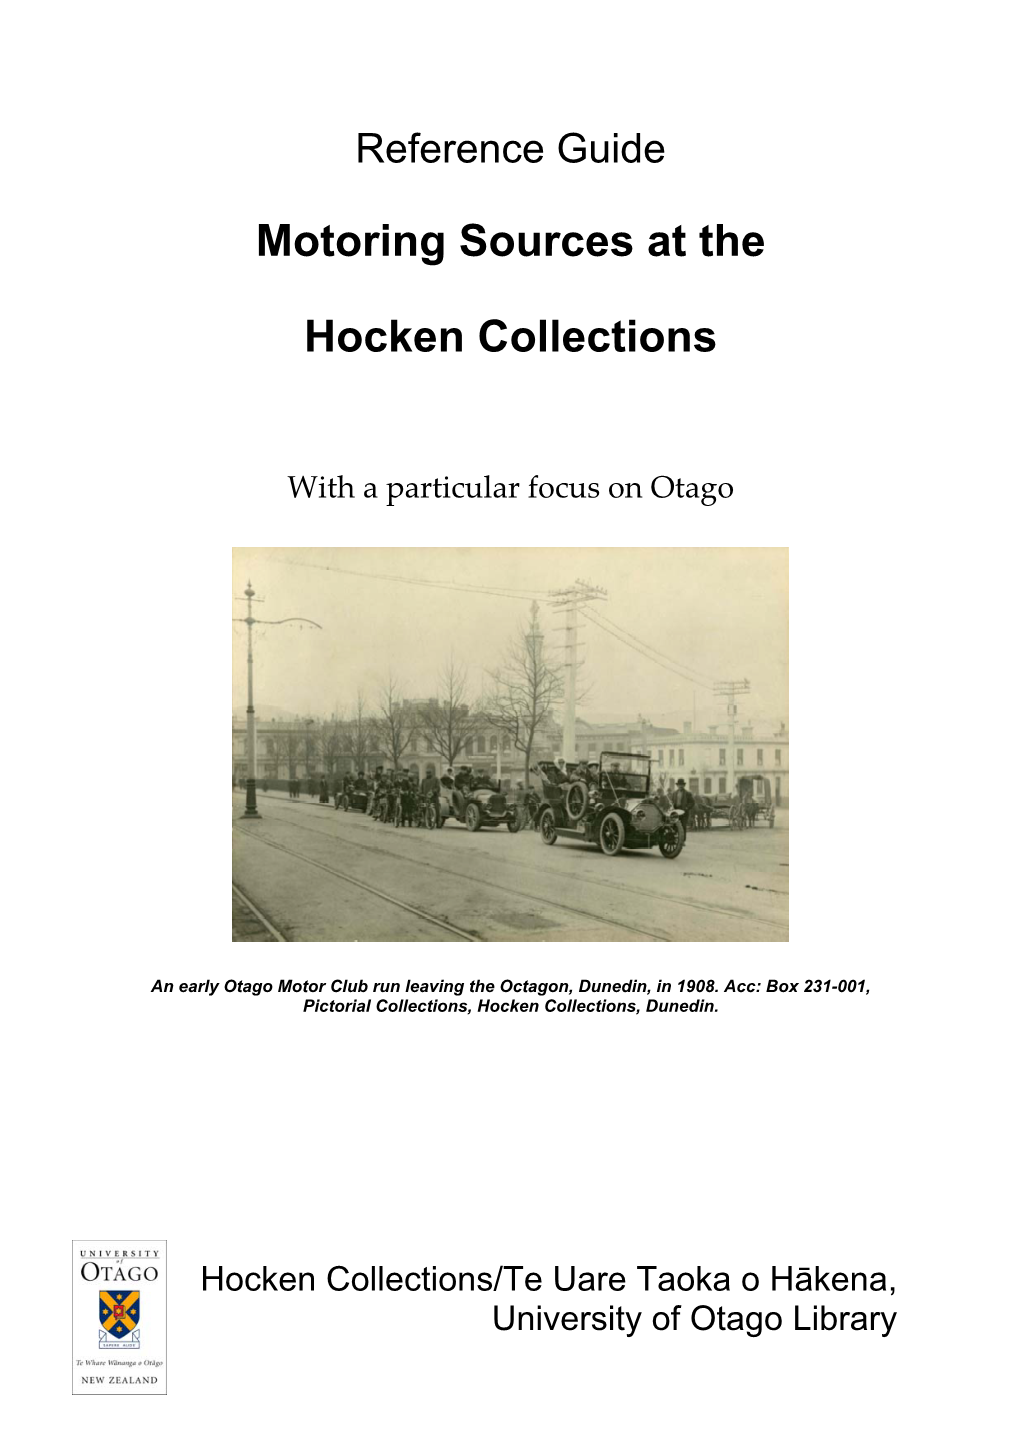 Motoring Sources at the Hocken Collections